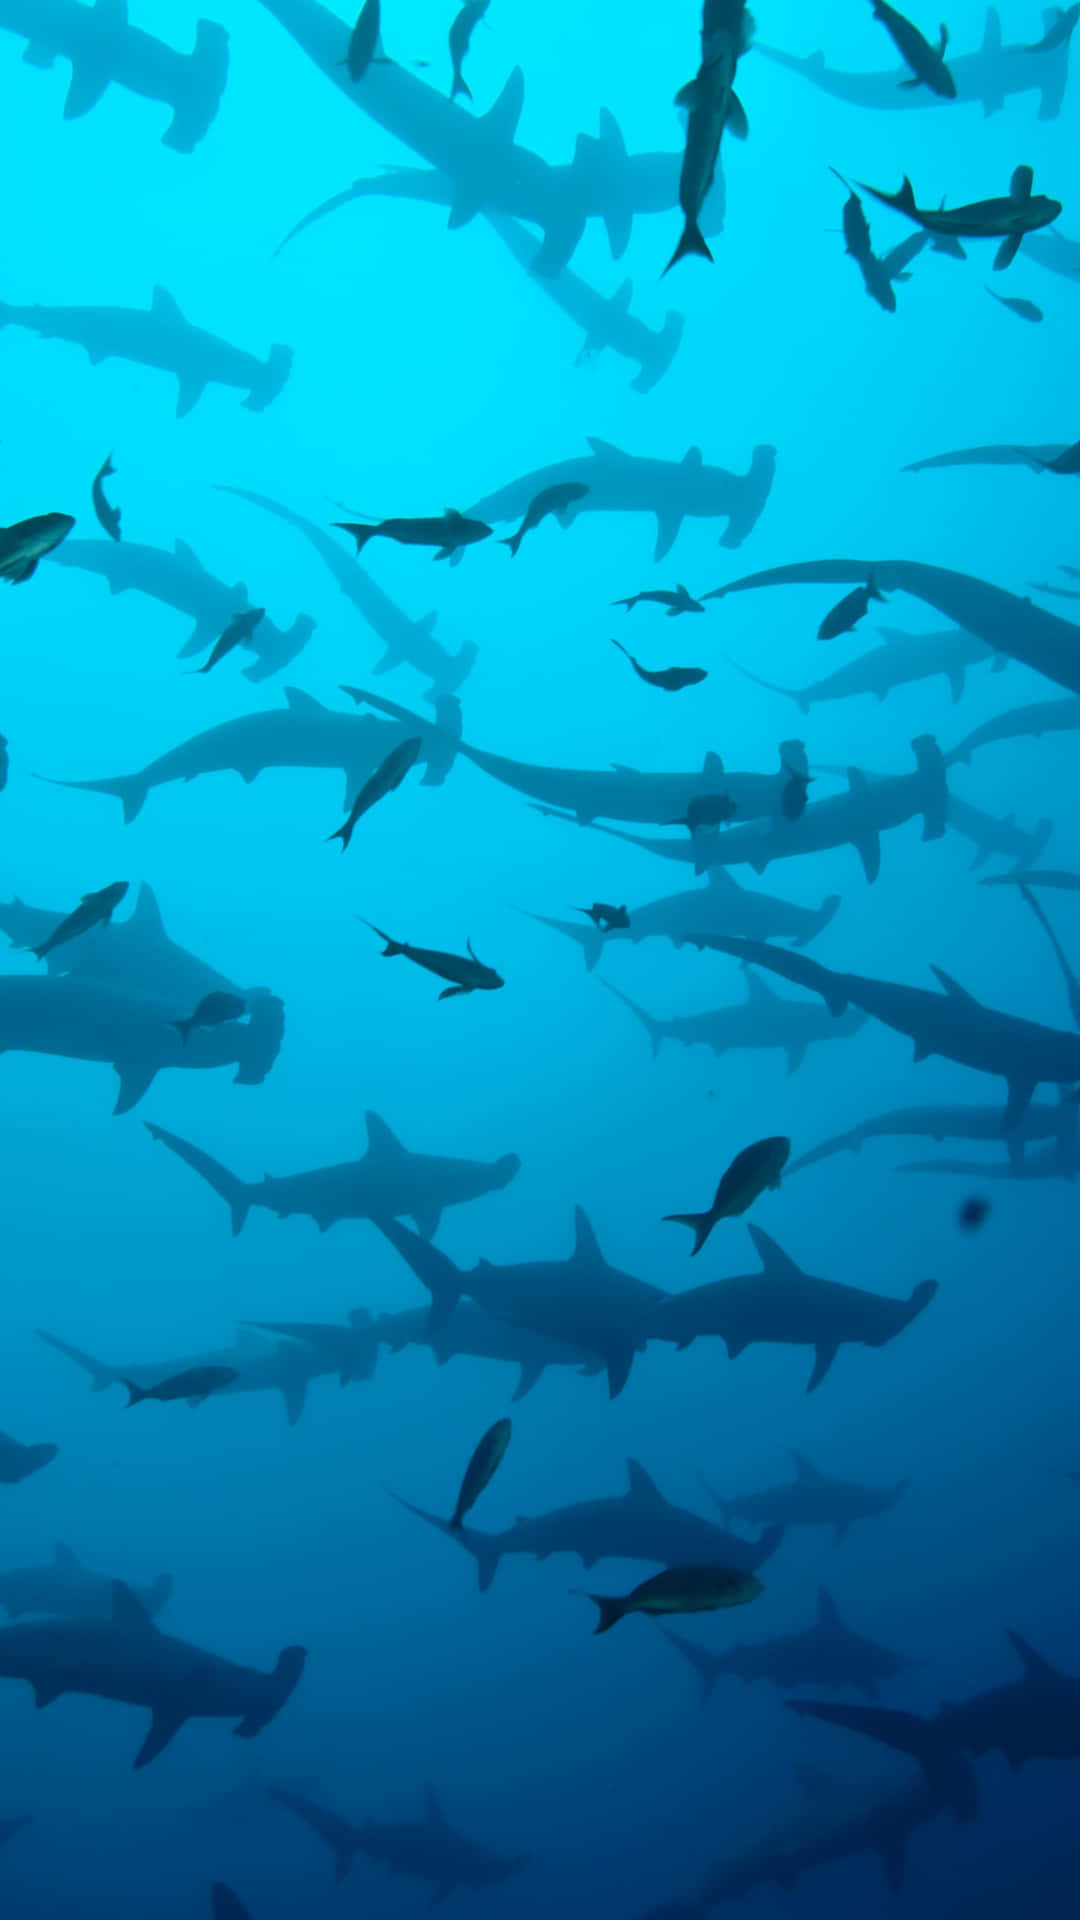 A Large Group Of Sharks Swimming In The Ocean Wallpaper